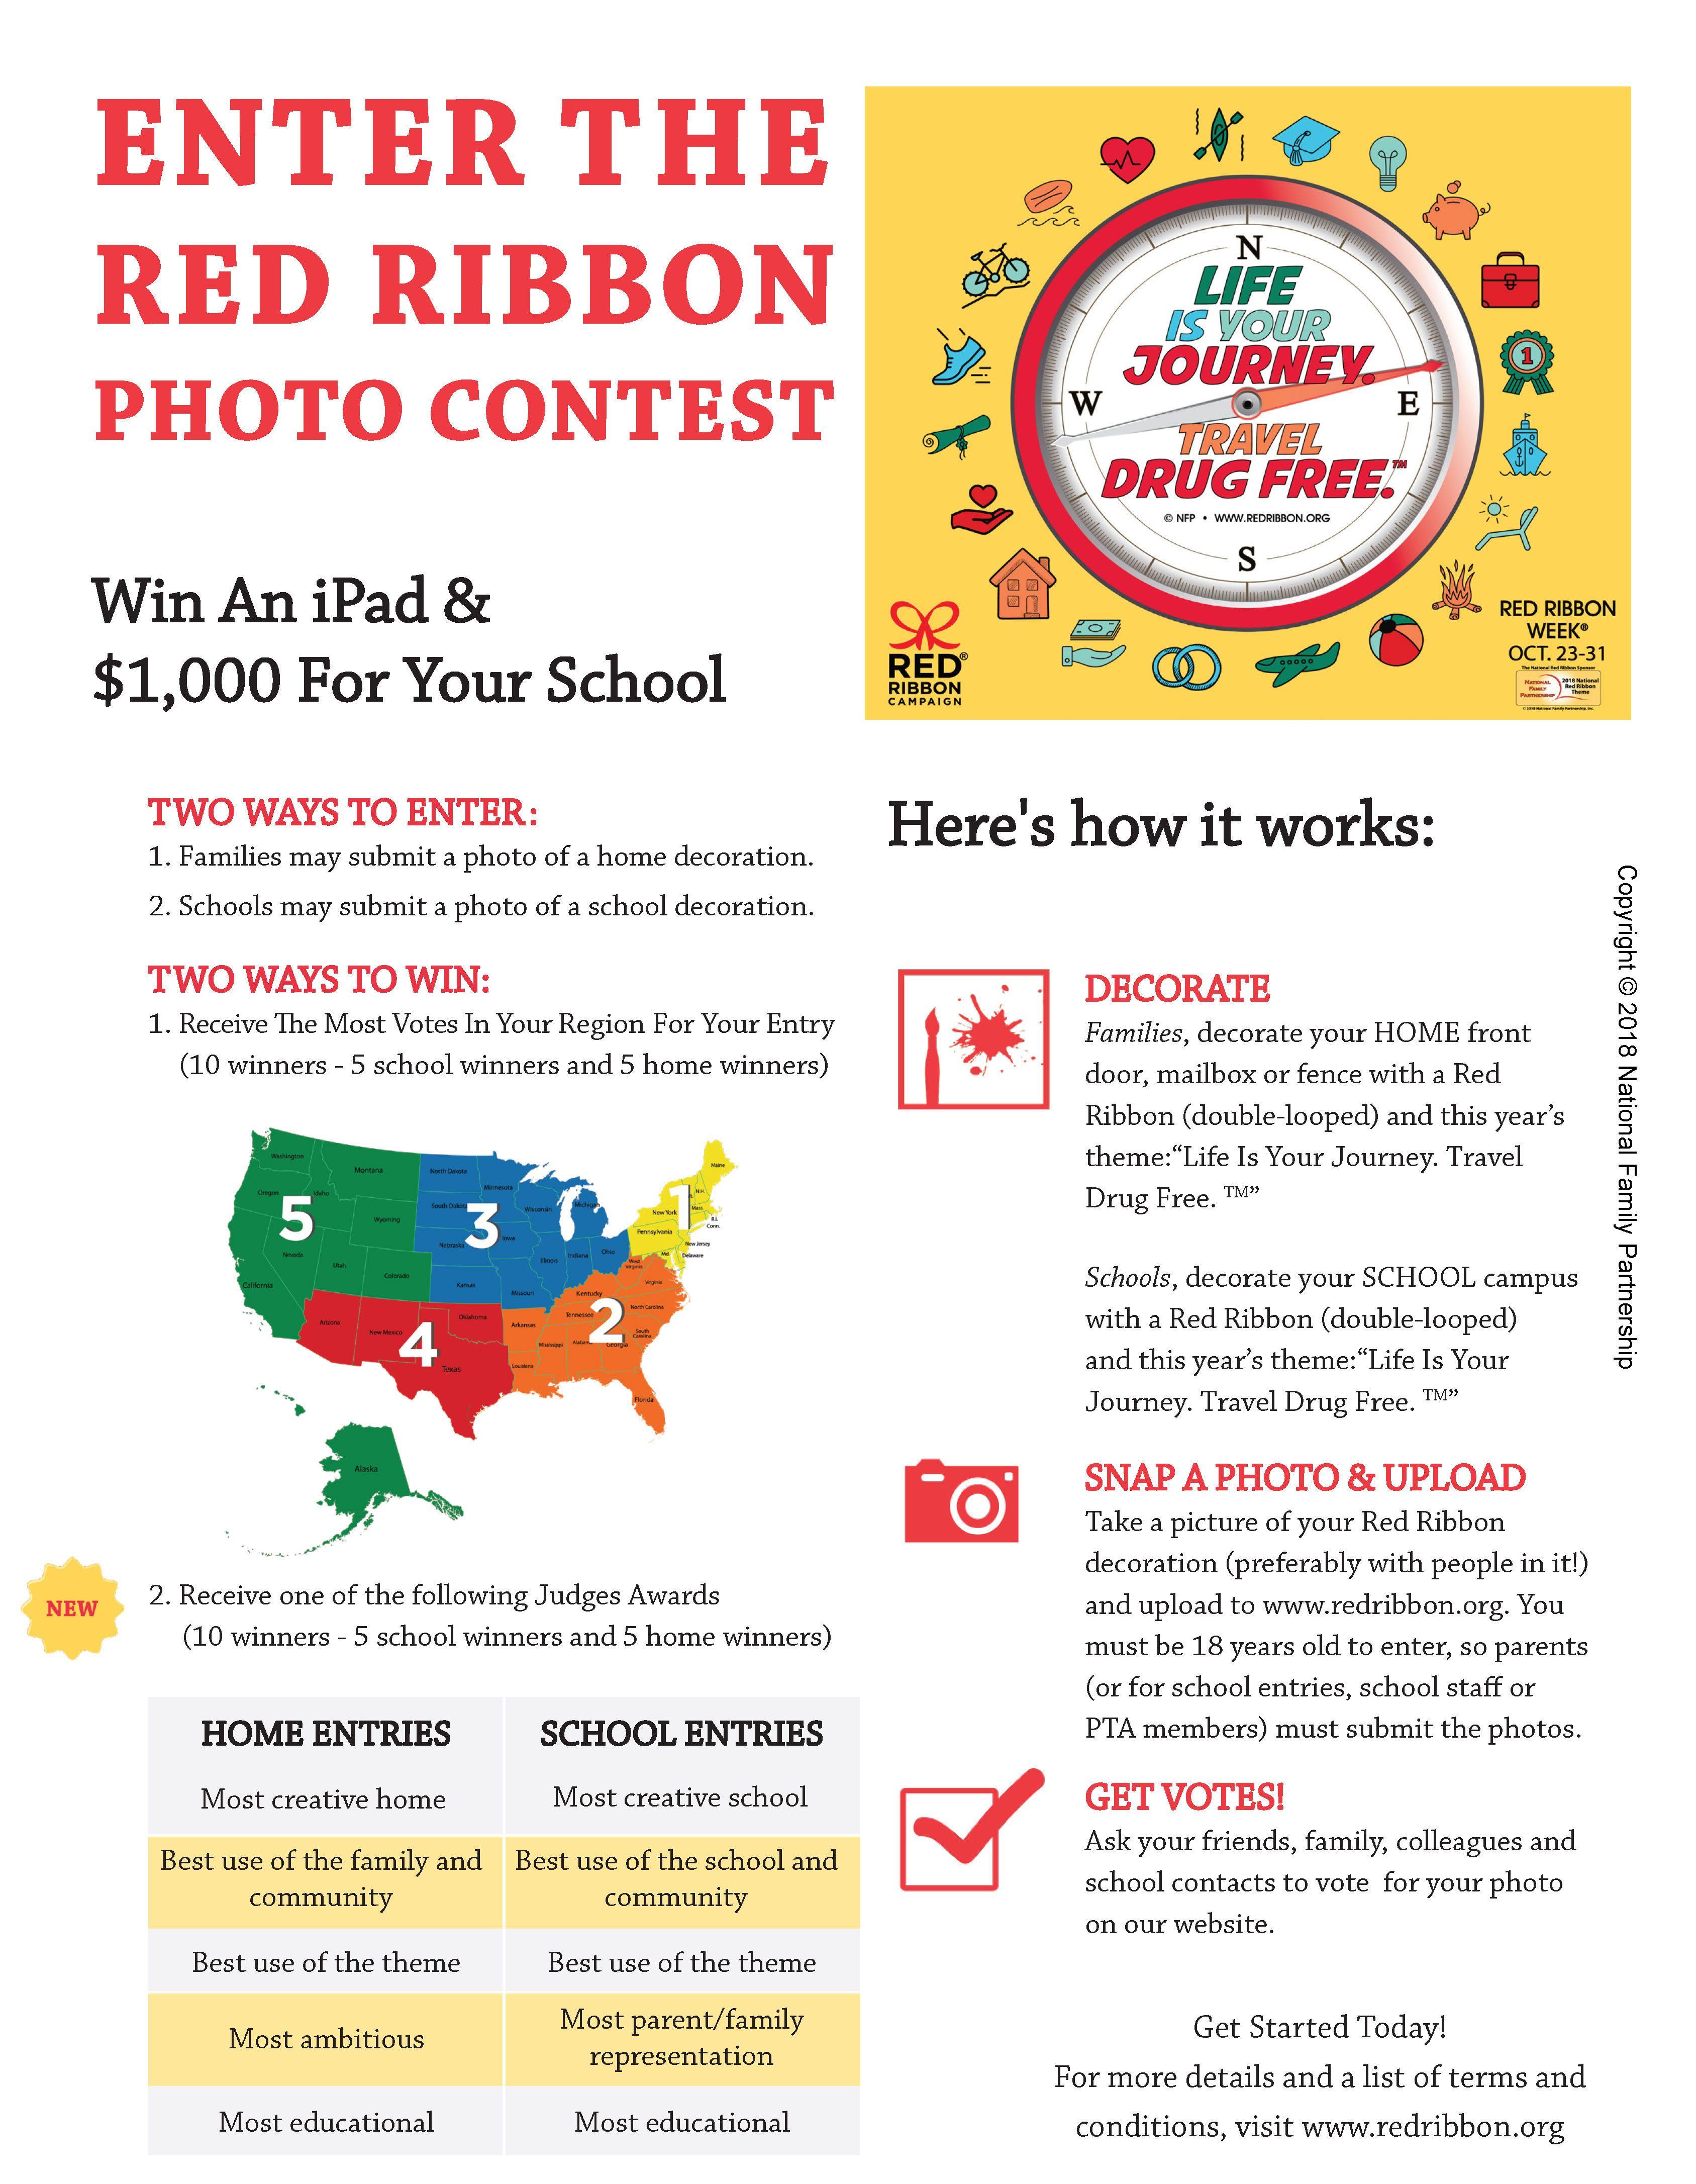 Orange and Red Ribbon Logo - Red Ribbon Campaign: 2018 Red Ribbon Photo Contest